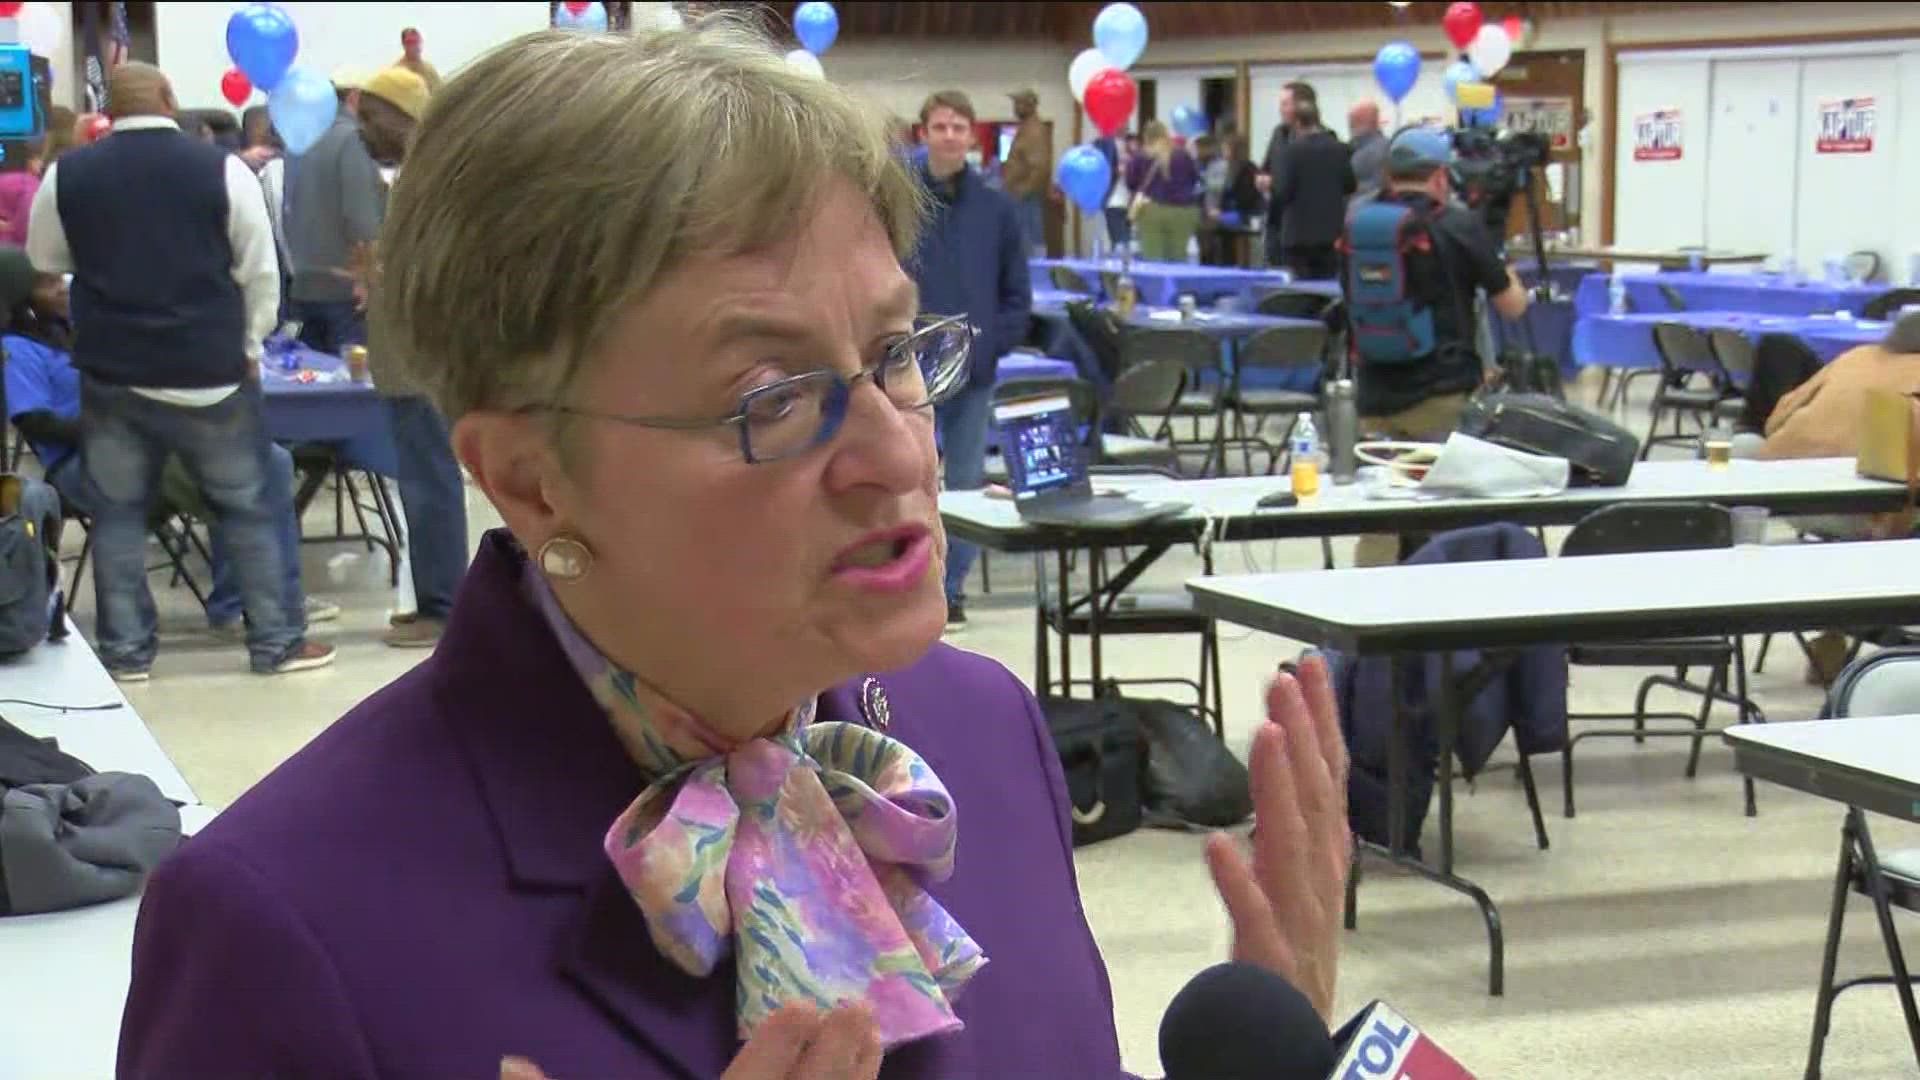 Democrat Marcy Kaptur wins another term in Congress, defeating J.R. Majewski in the newly redrawn 9th district.